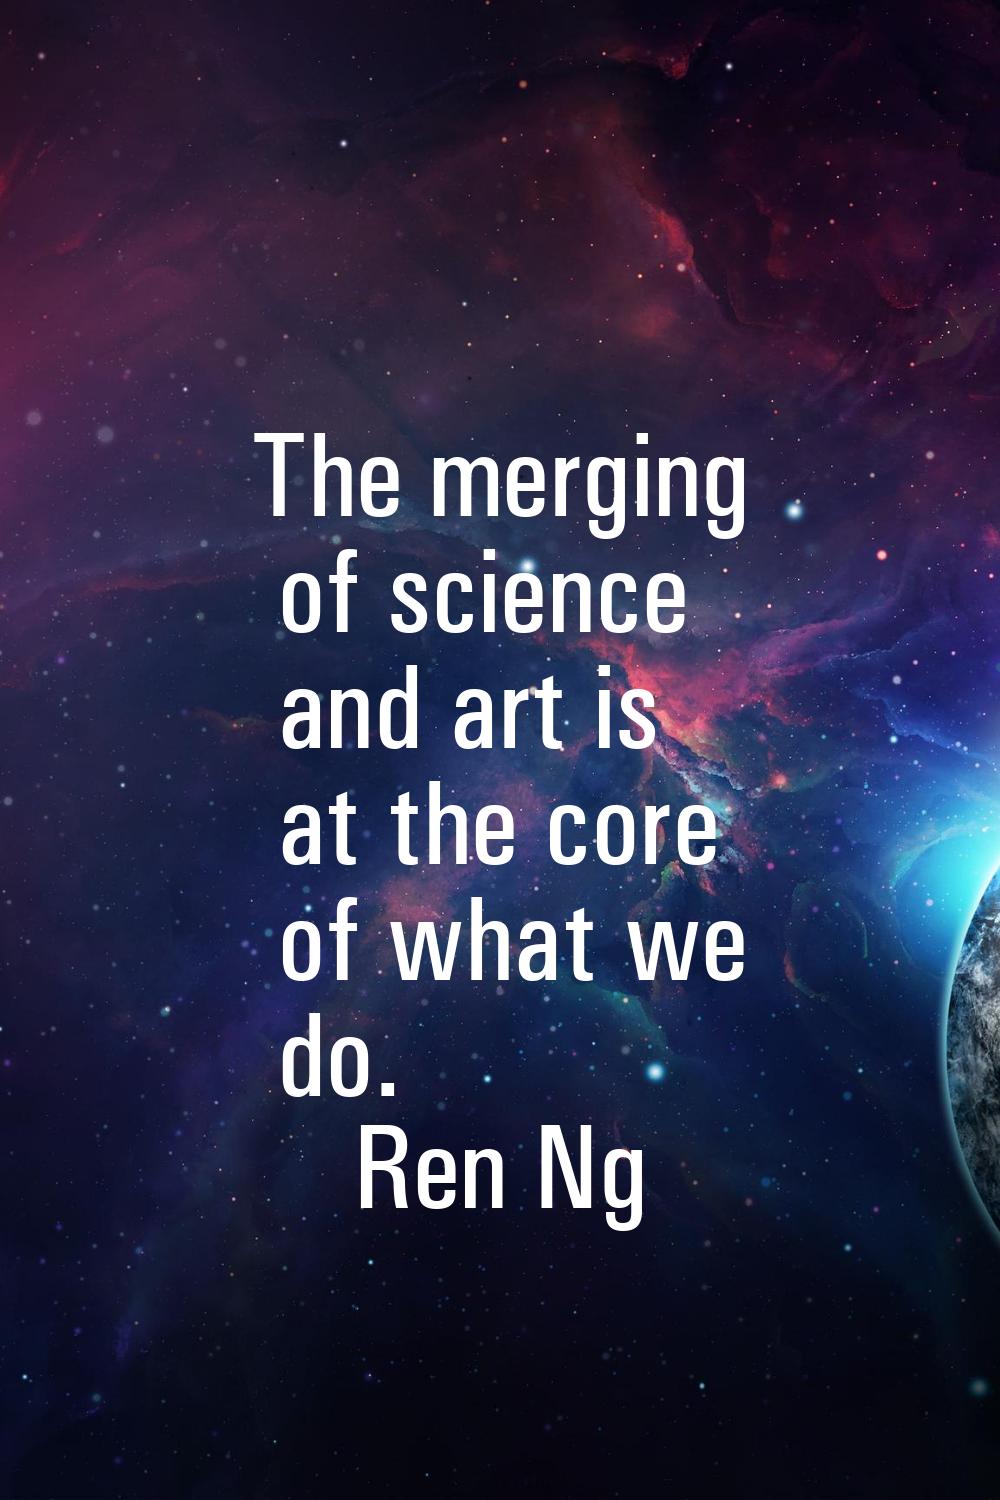 The merging of science and art is at the core of what we do.